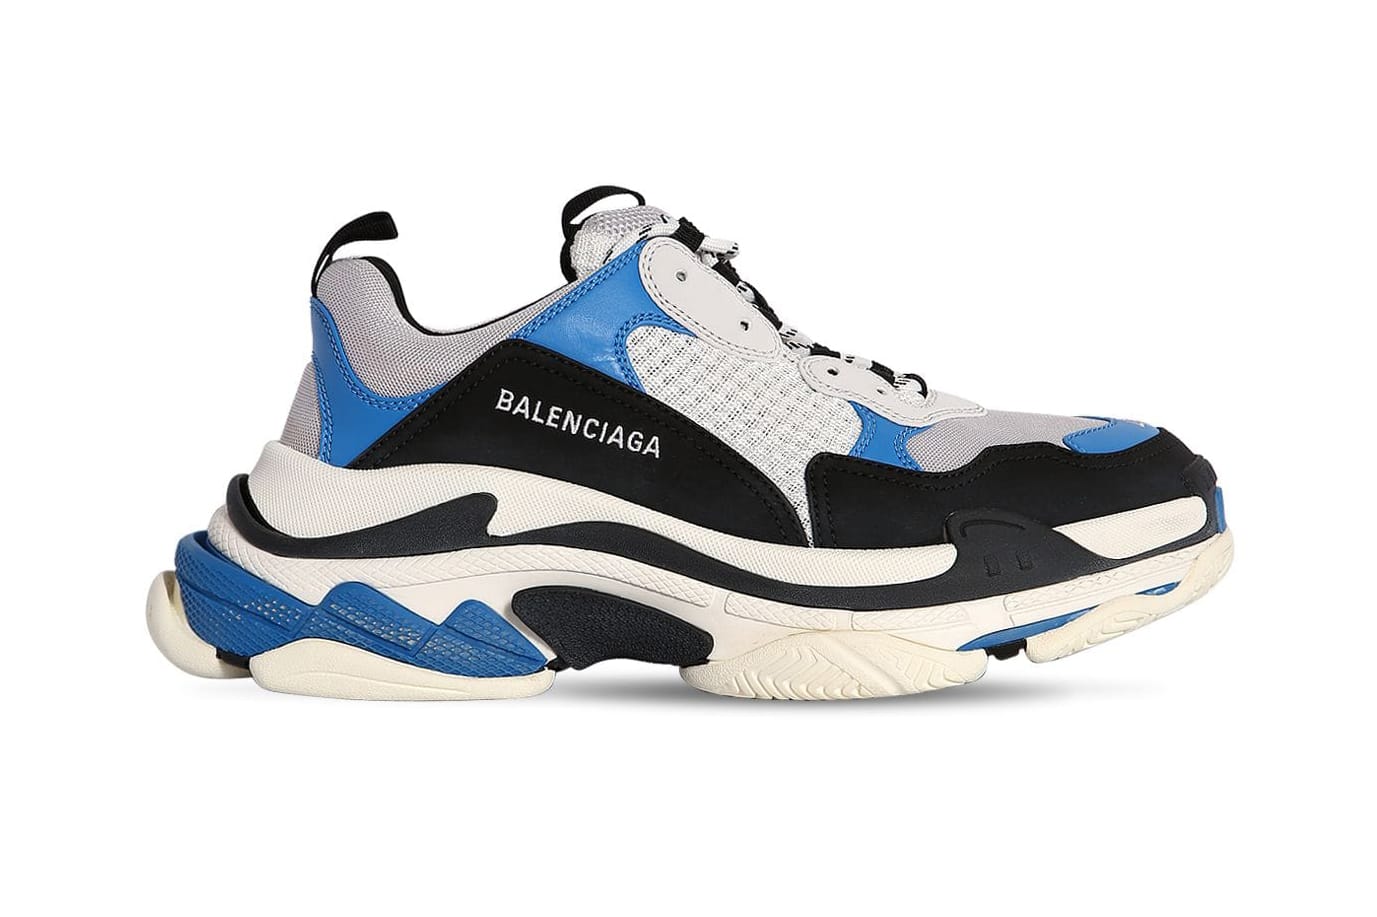 Balenciaga red triple s clear sole sneakers Browns